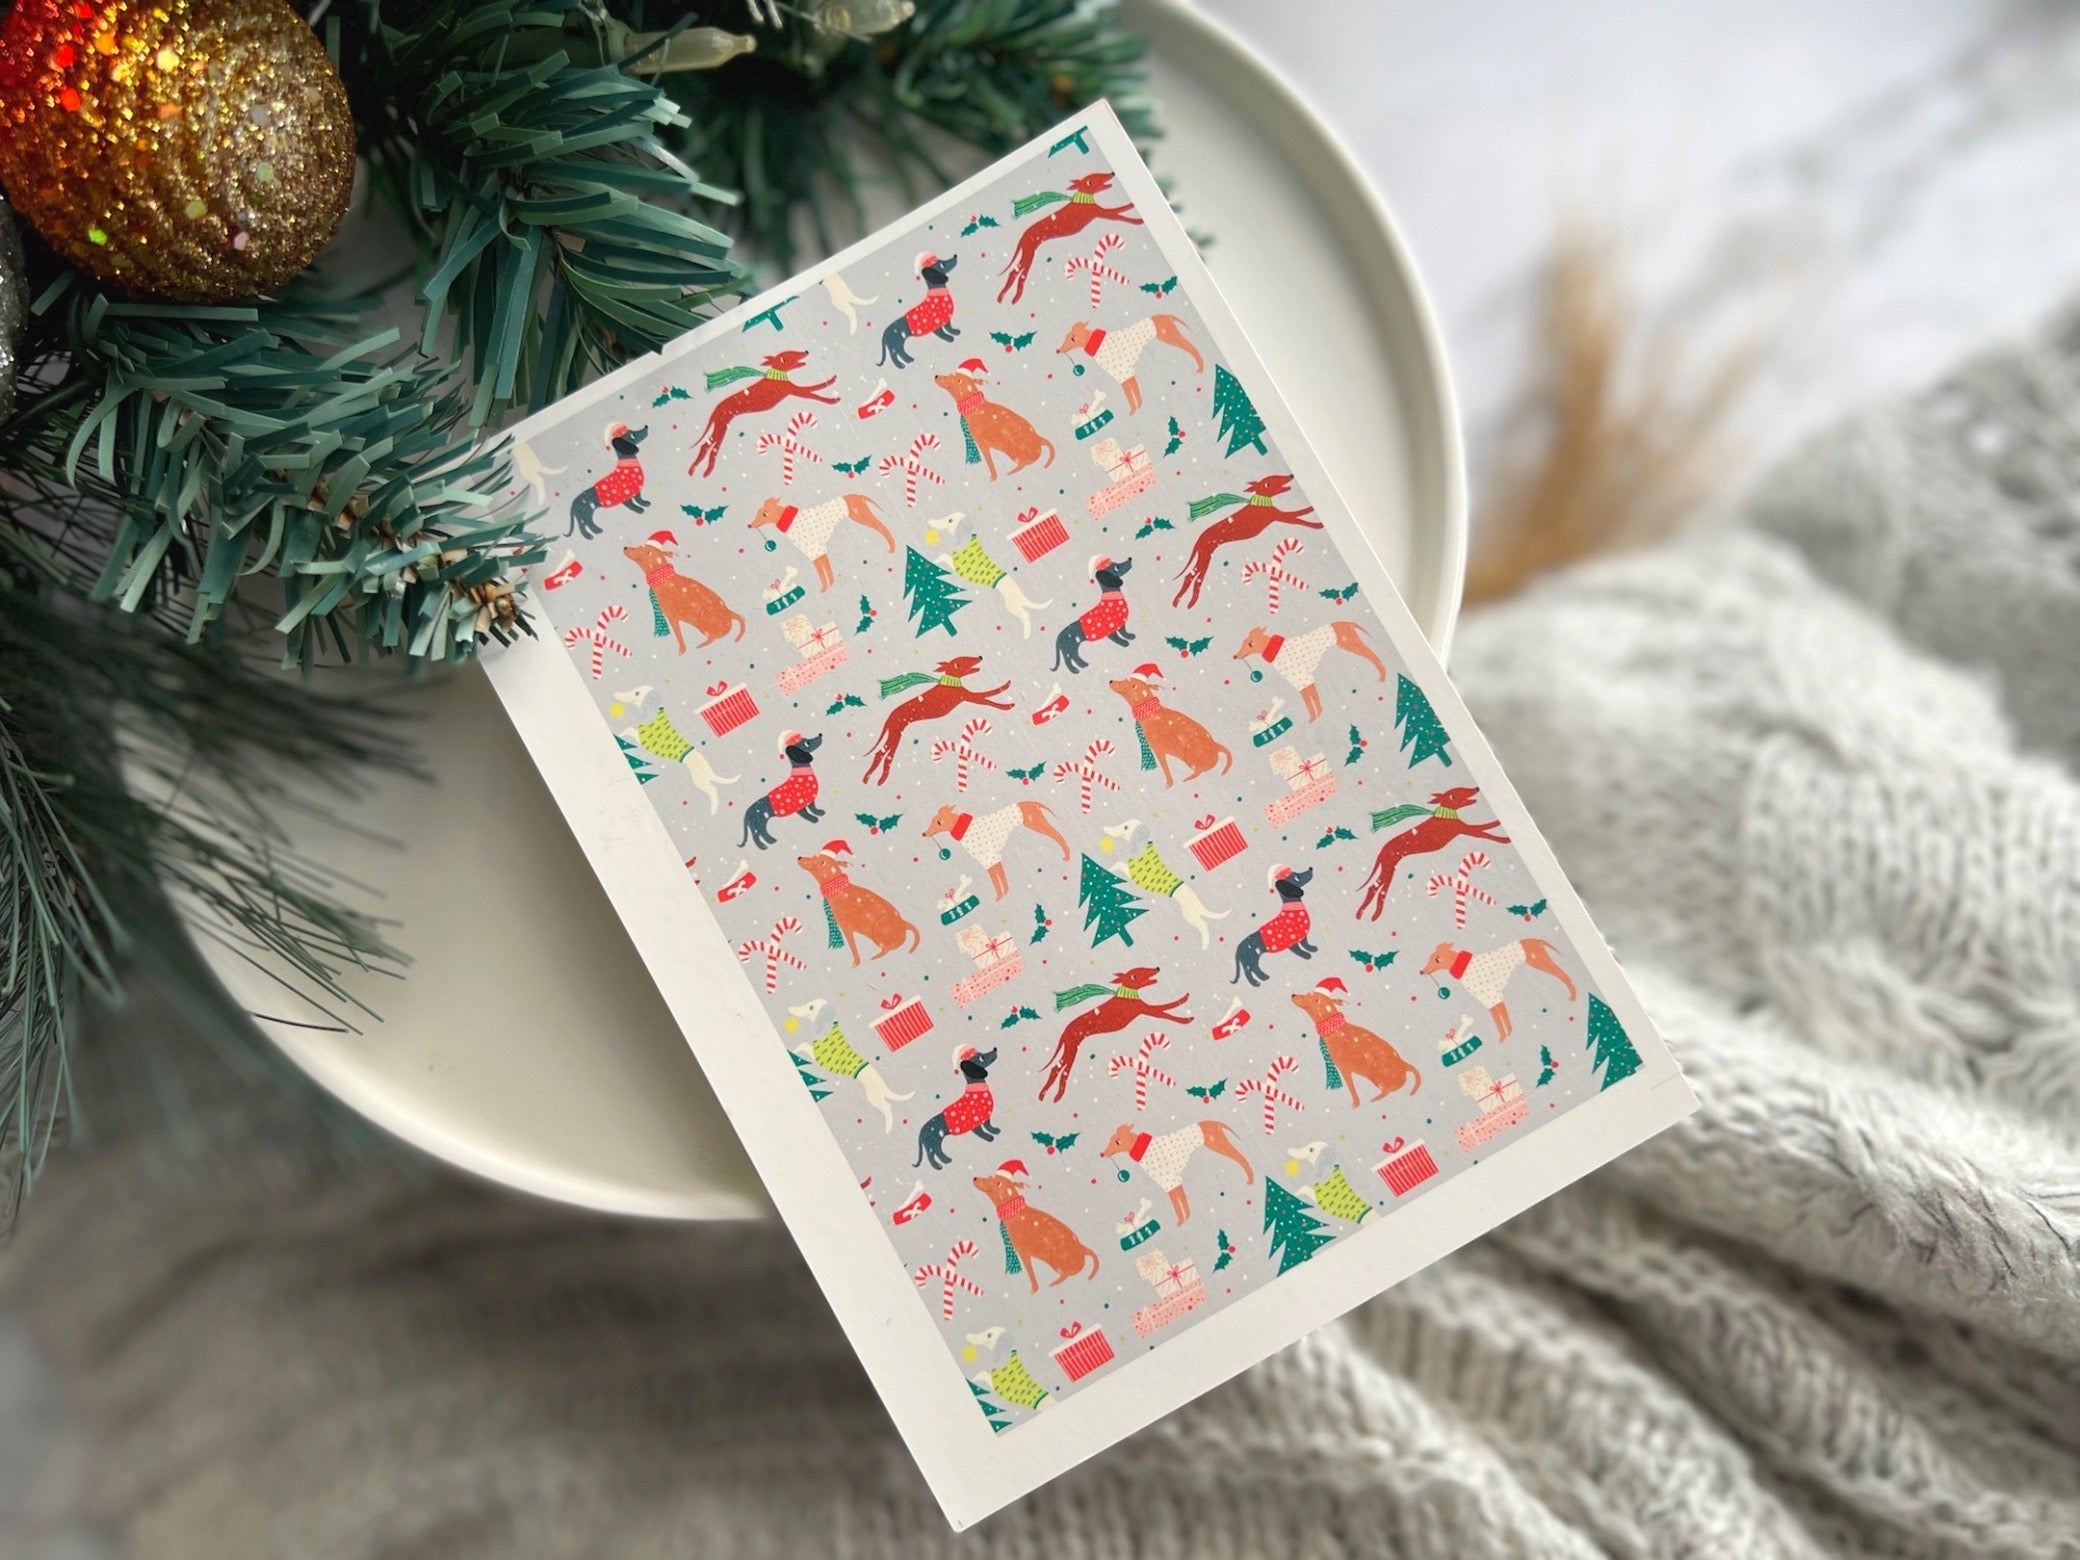 1 Sheet, Approx 13x90cm, Christmas Print Water Decal Image Transfer for Polymer Clay / Ceramics